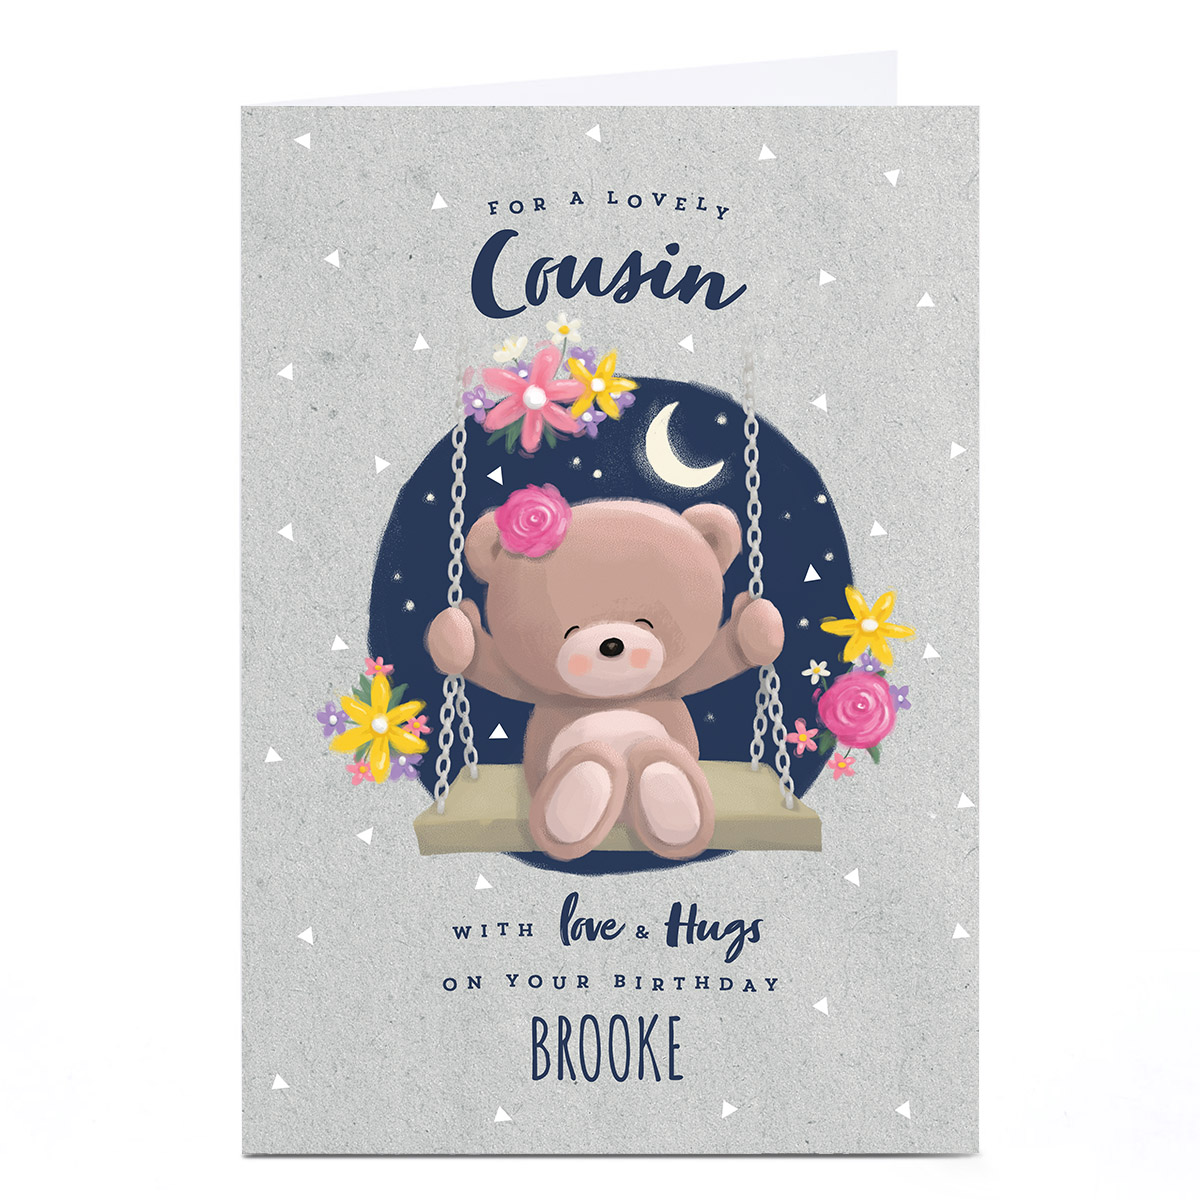 Personalised Hugs Birthday Card - For A Lovely Cousin